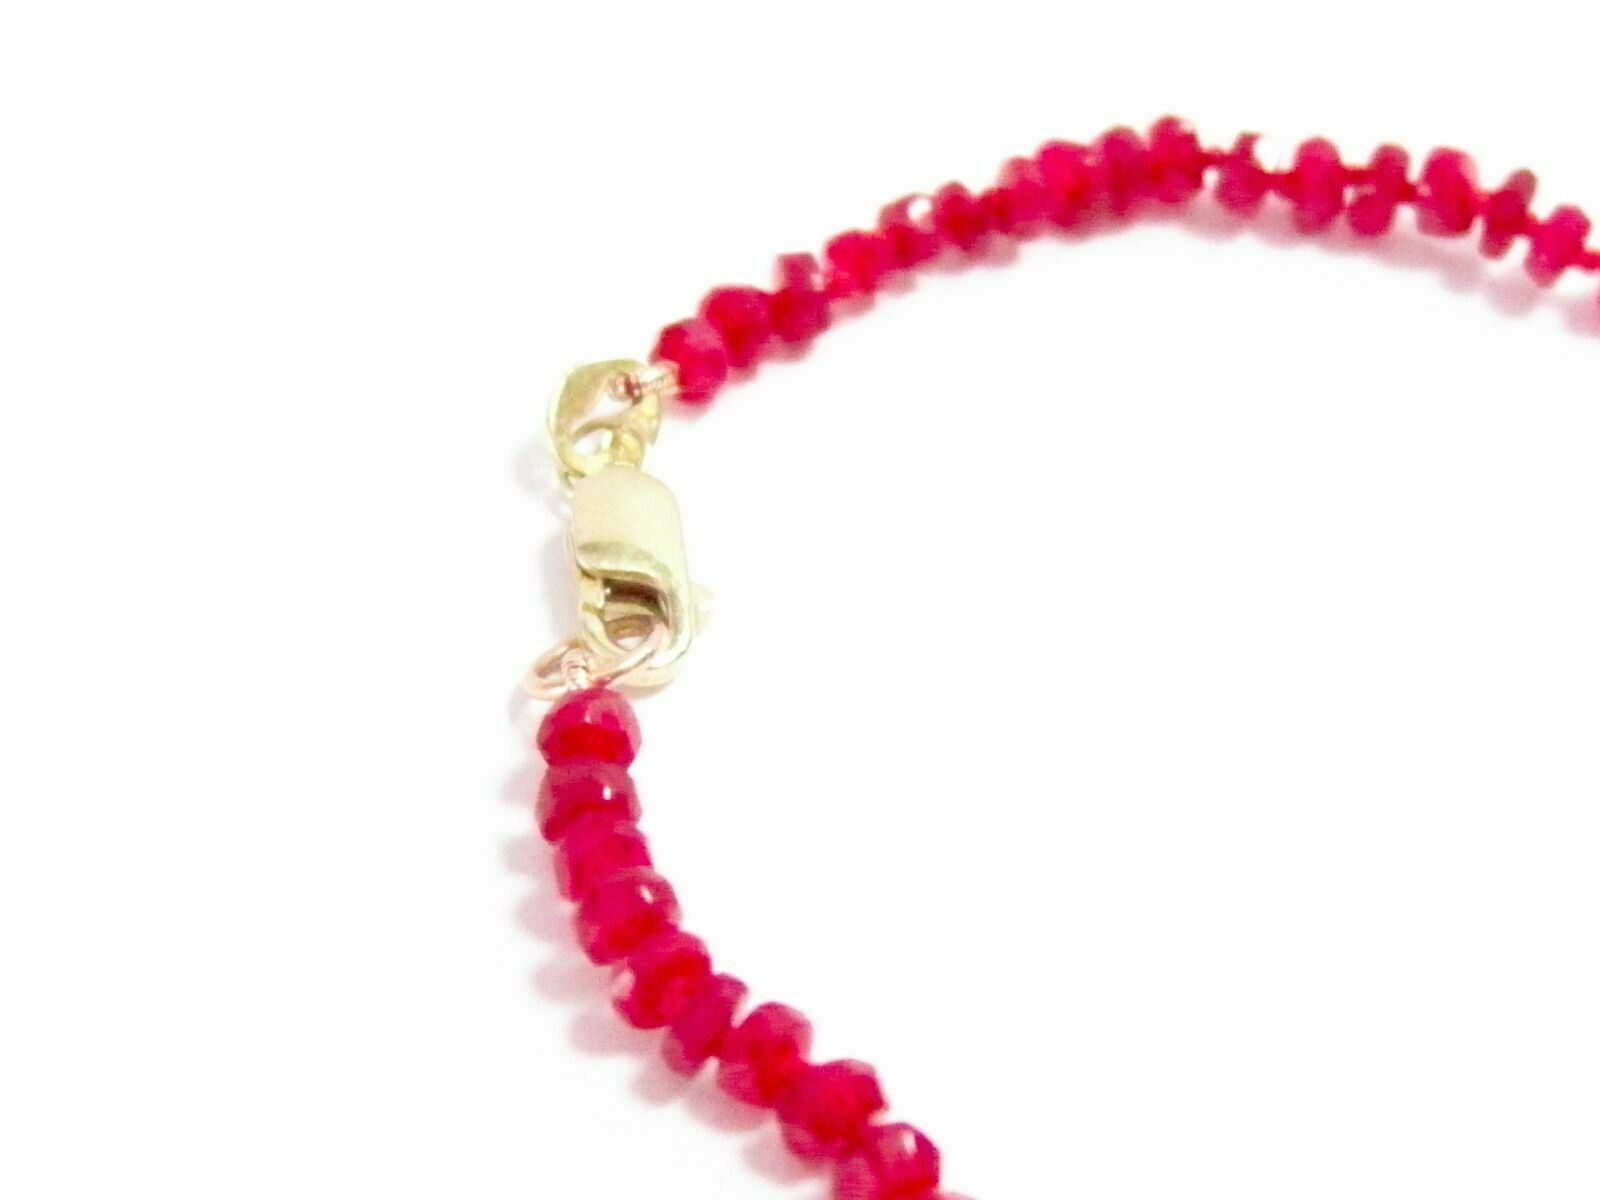 Fine Red Ruby Beads Strand String Necklace 14k Yellow Gold 17 Inches 33 Carats